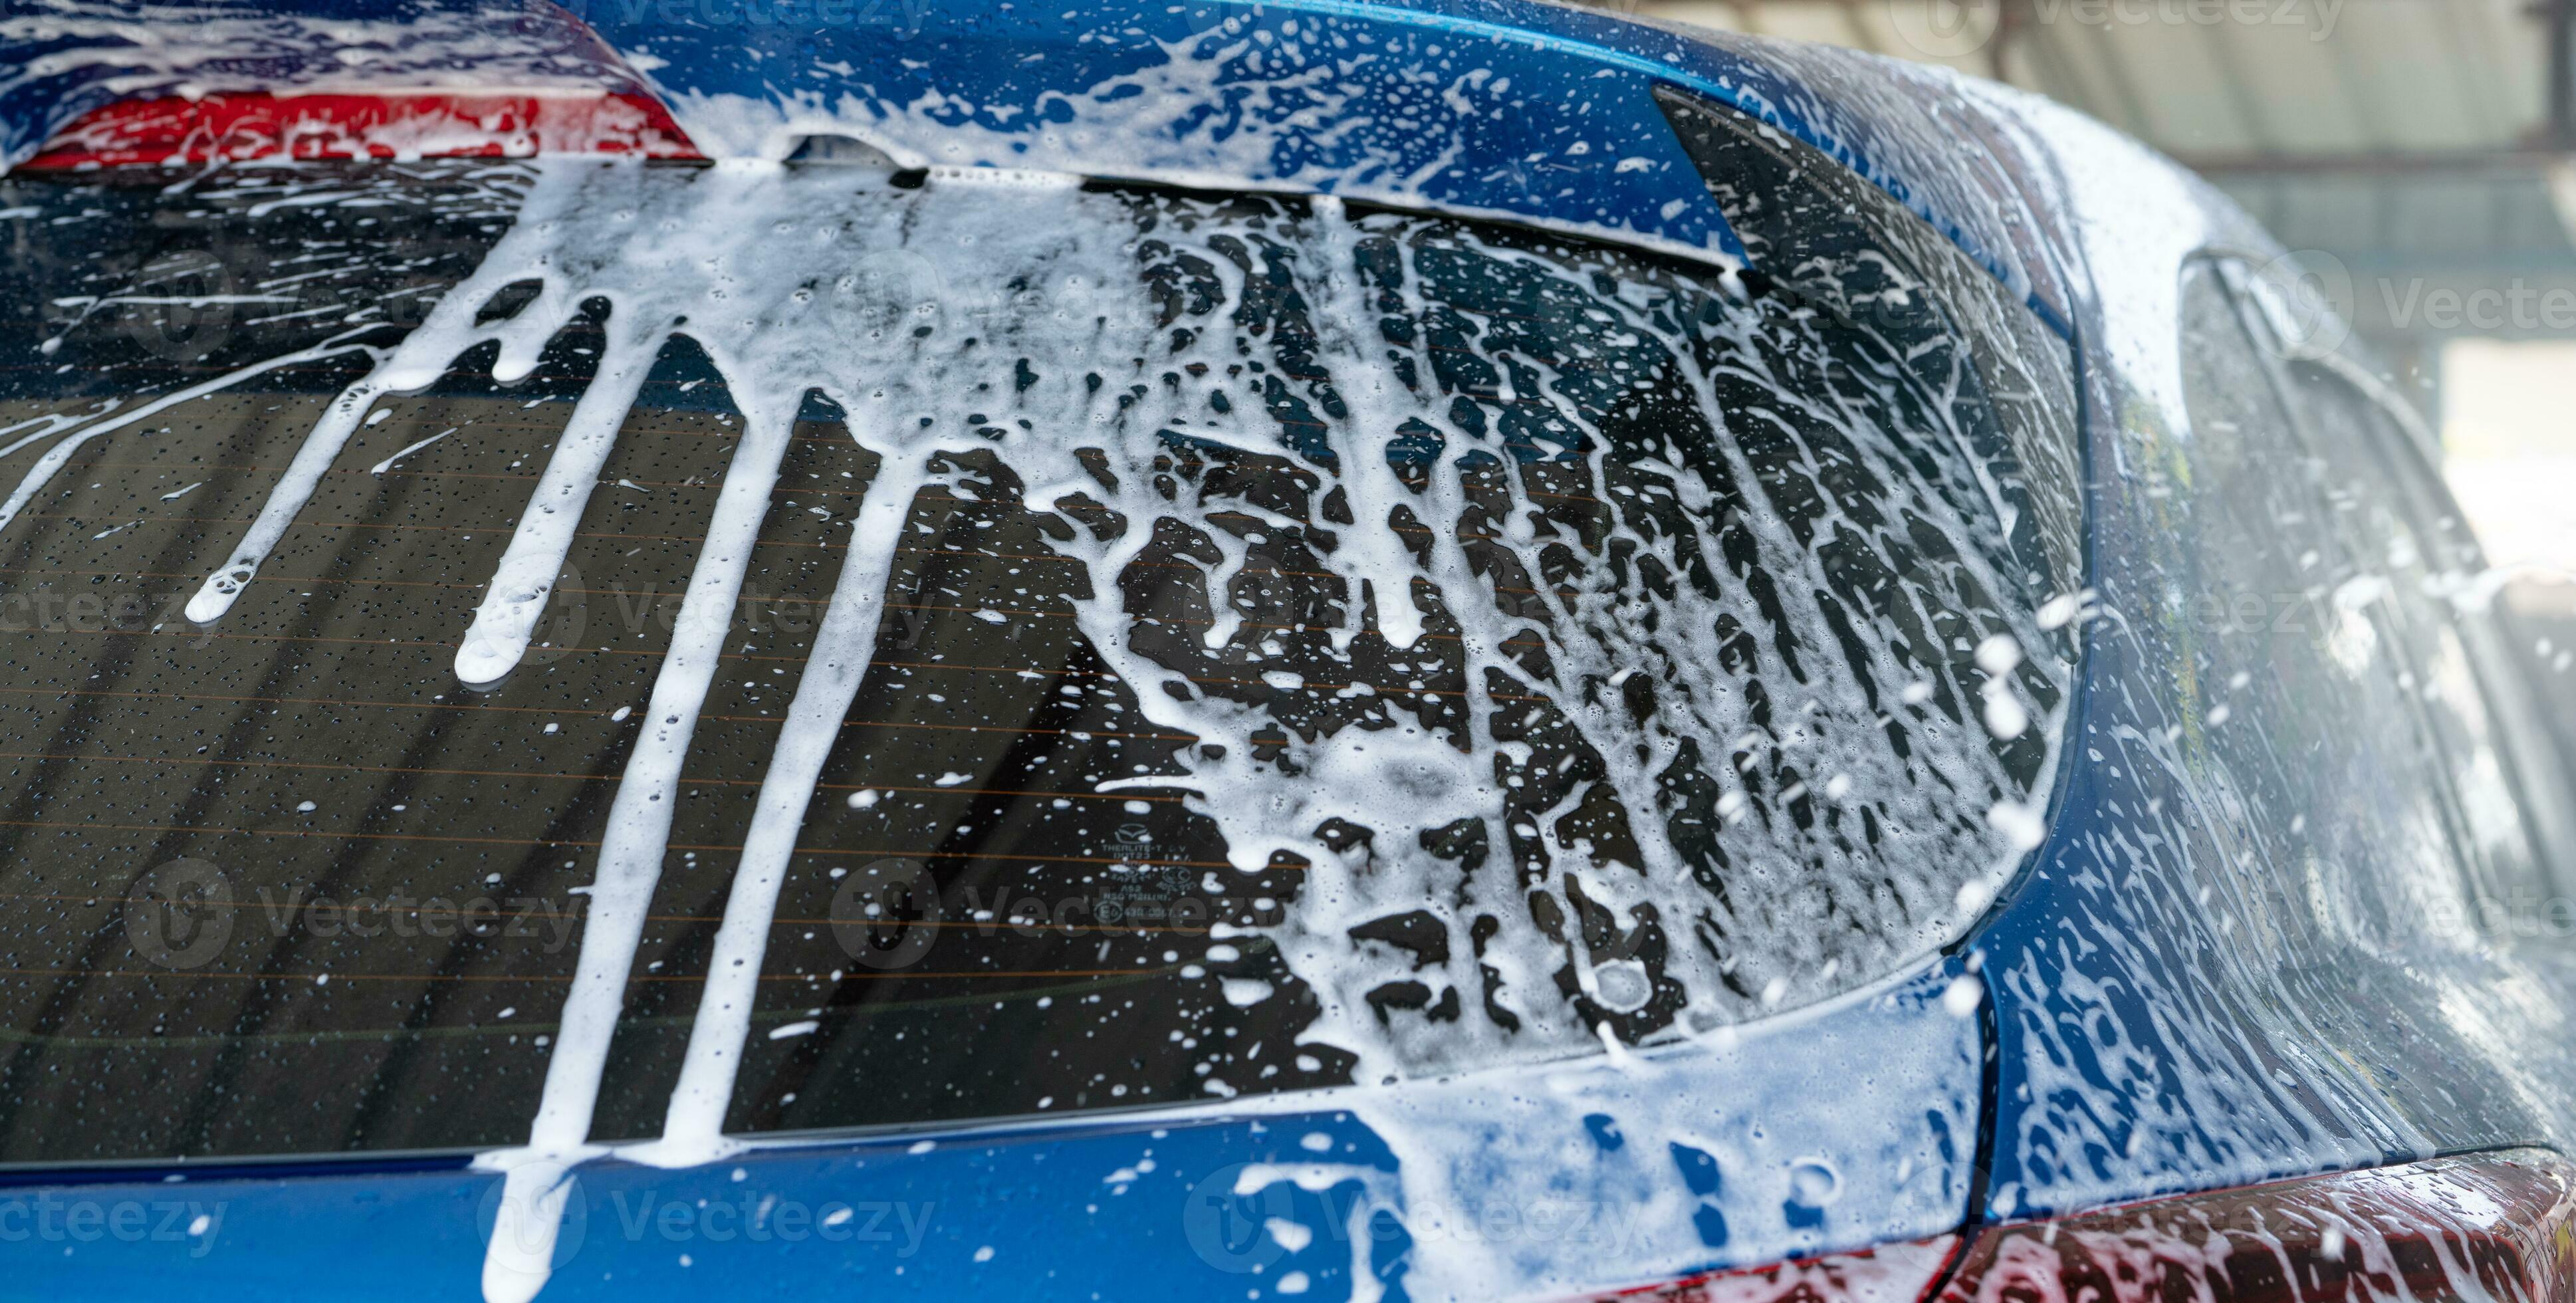 Wash Clean Car Foam Soap Carwash Stock Image - Image of laundered,  business: 228359987